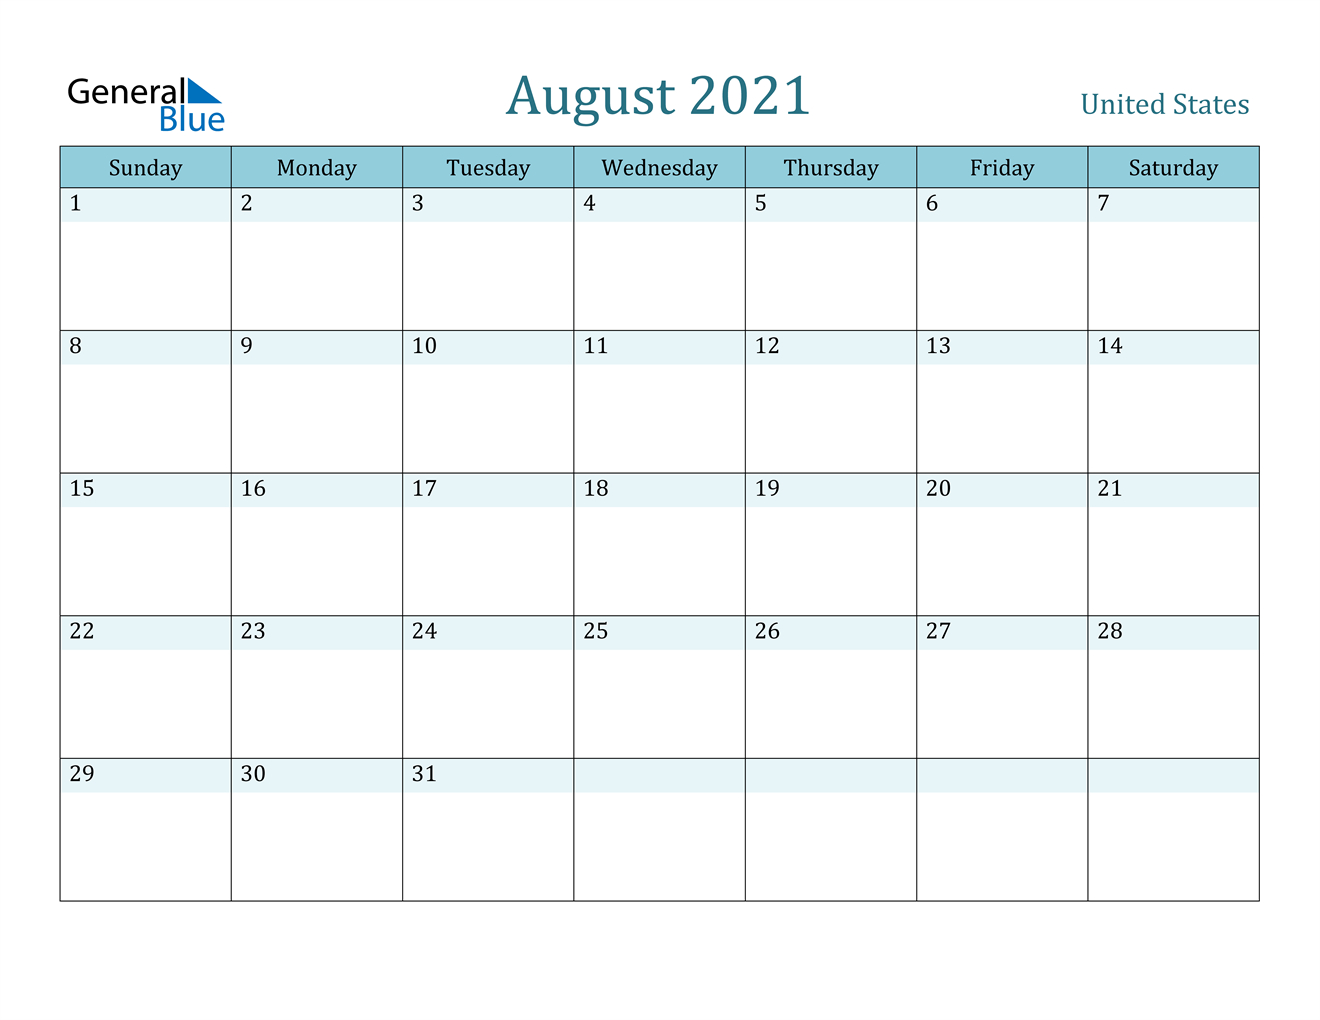 United States August 2021 Calendar With Holidays-August 2021 Calendar